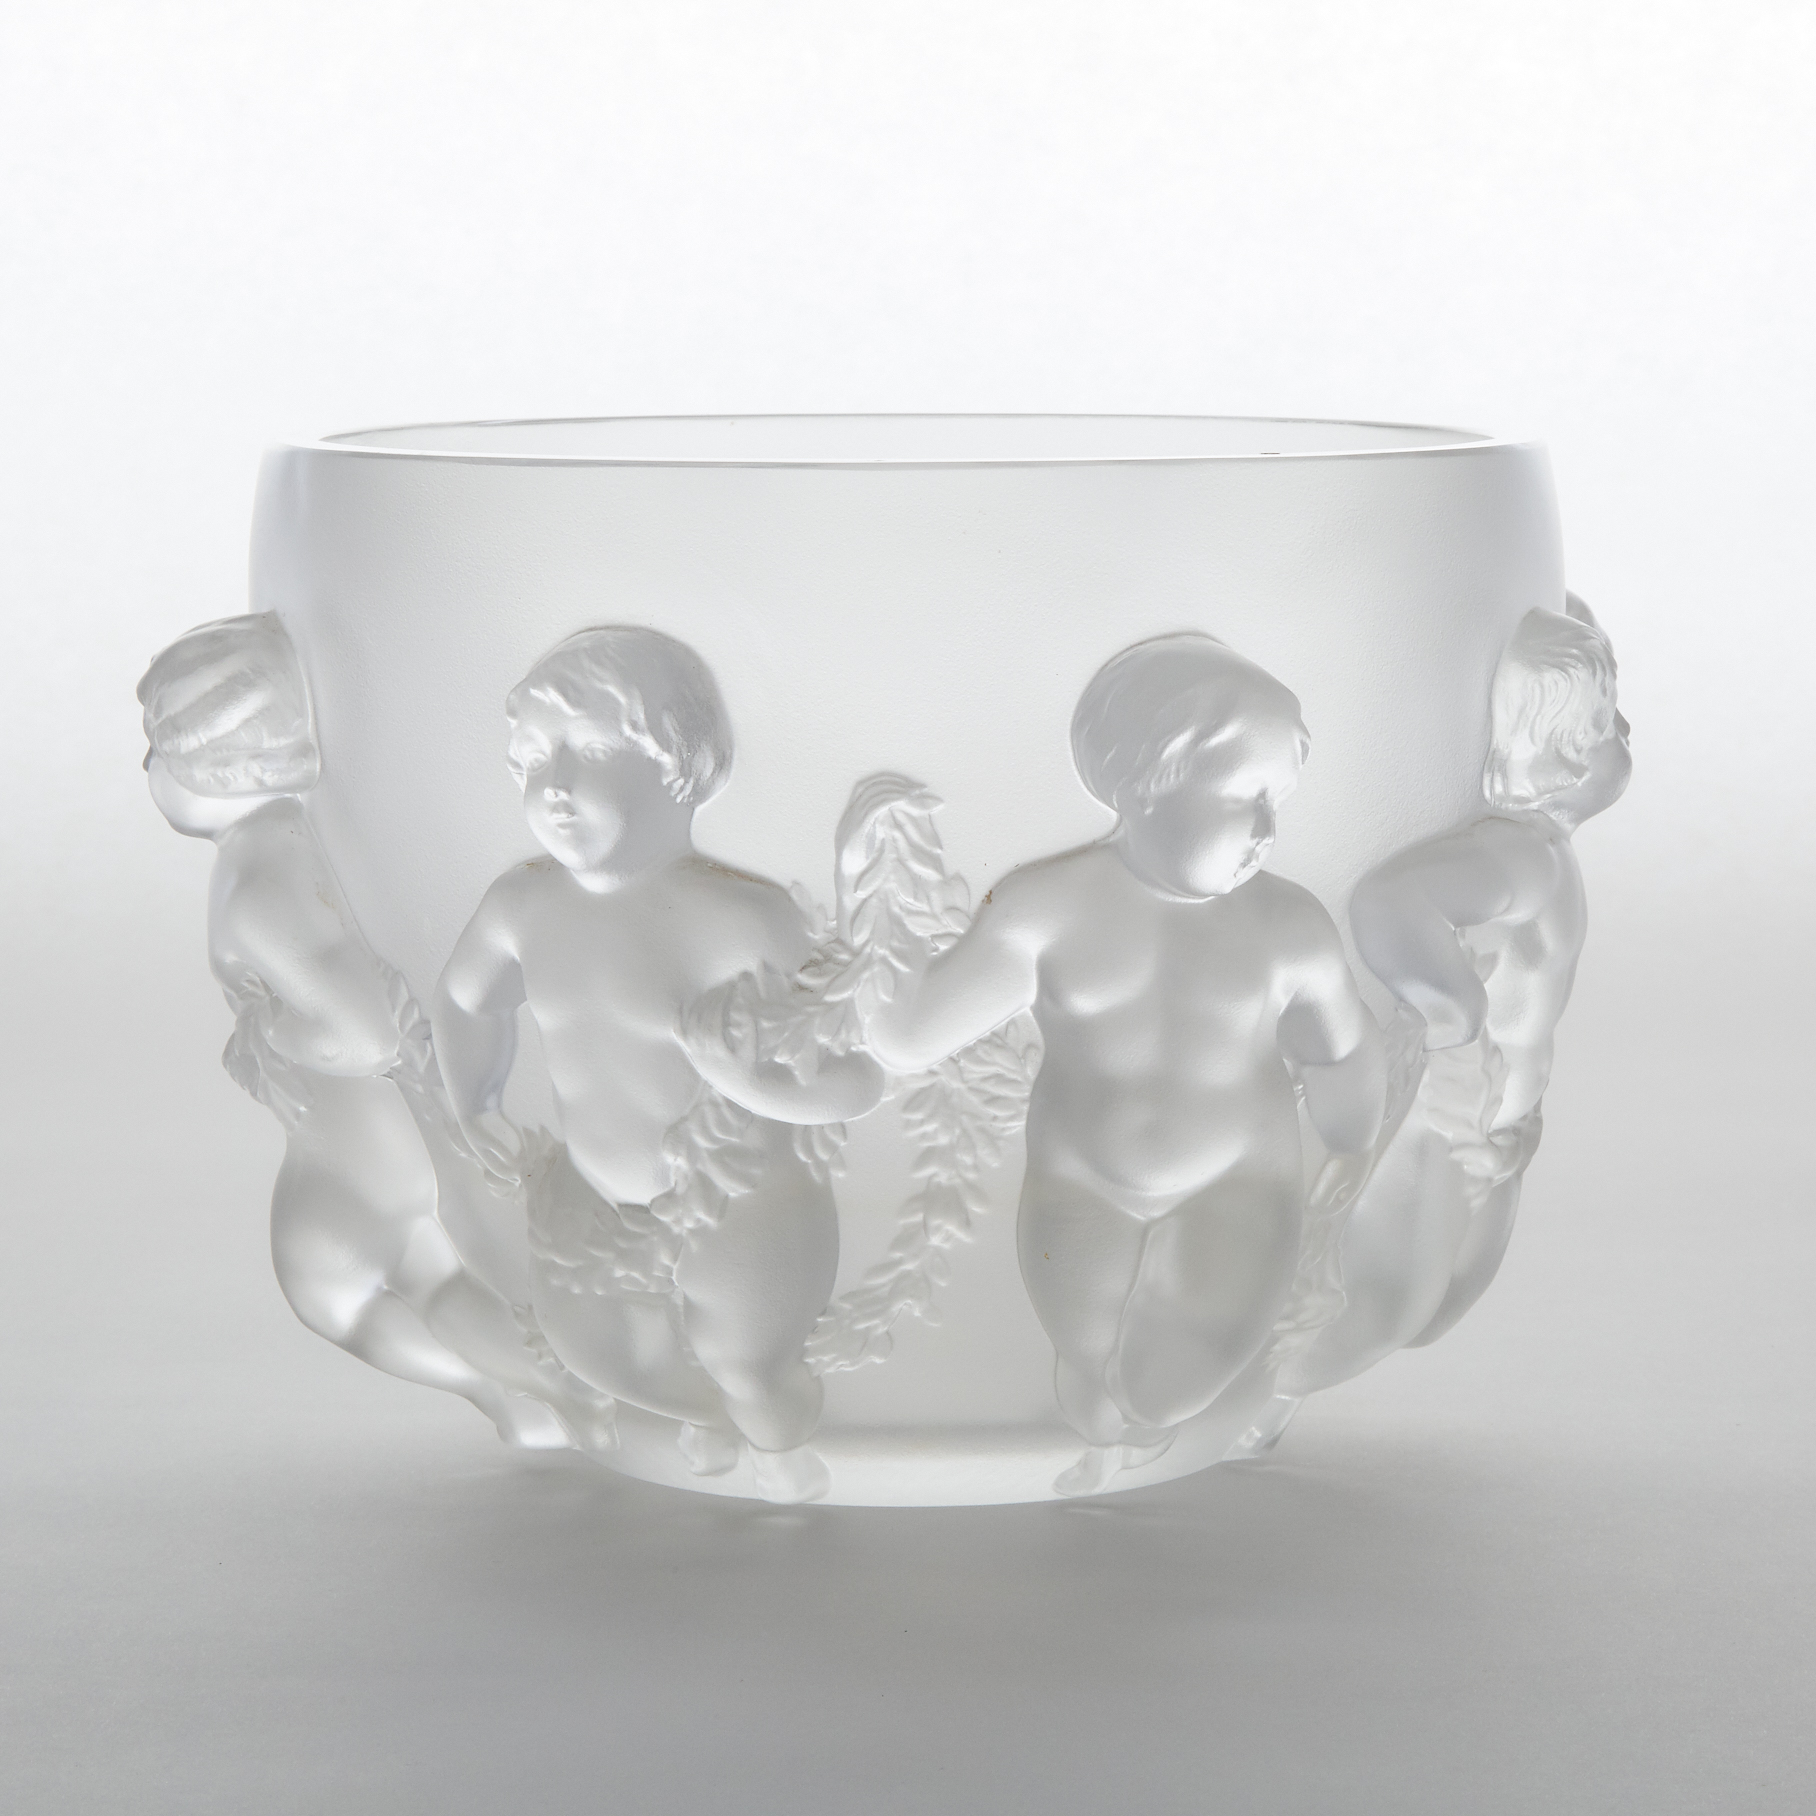 ‘Luxembourg’, Lalique Moulded and Frosted Glass Vase, post-1945